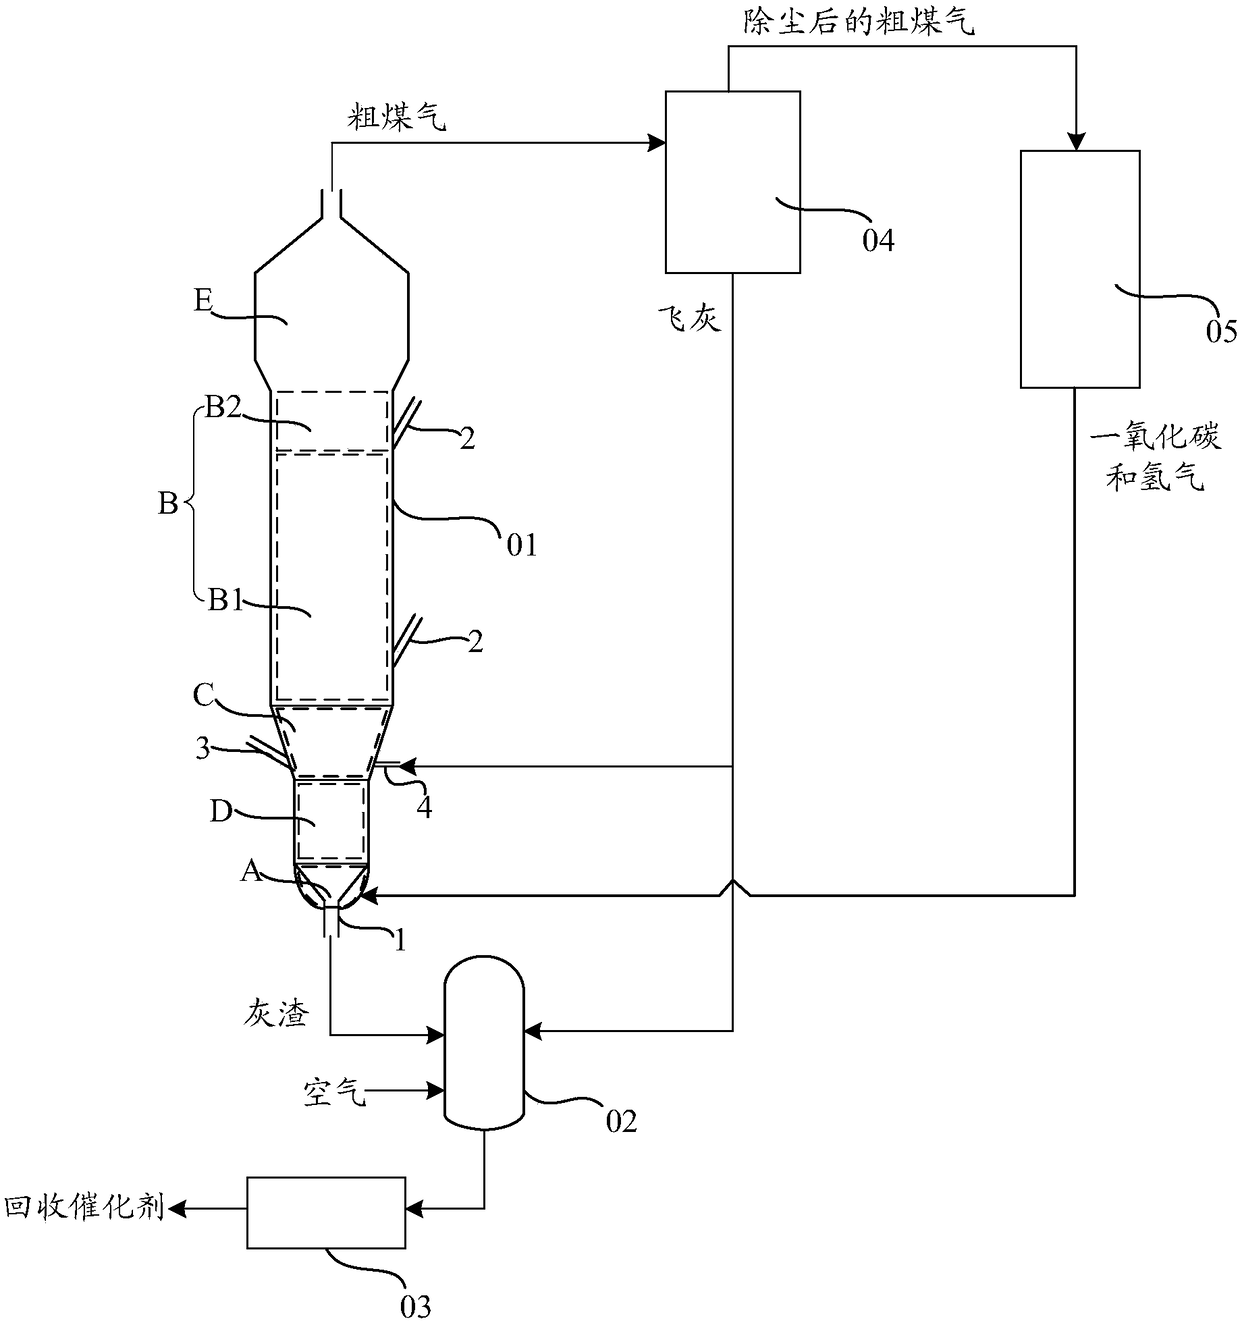 Fluidized bed gasifier, coal gasification system and method